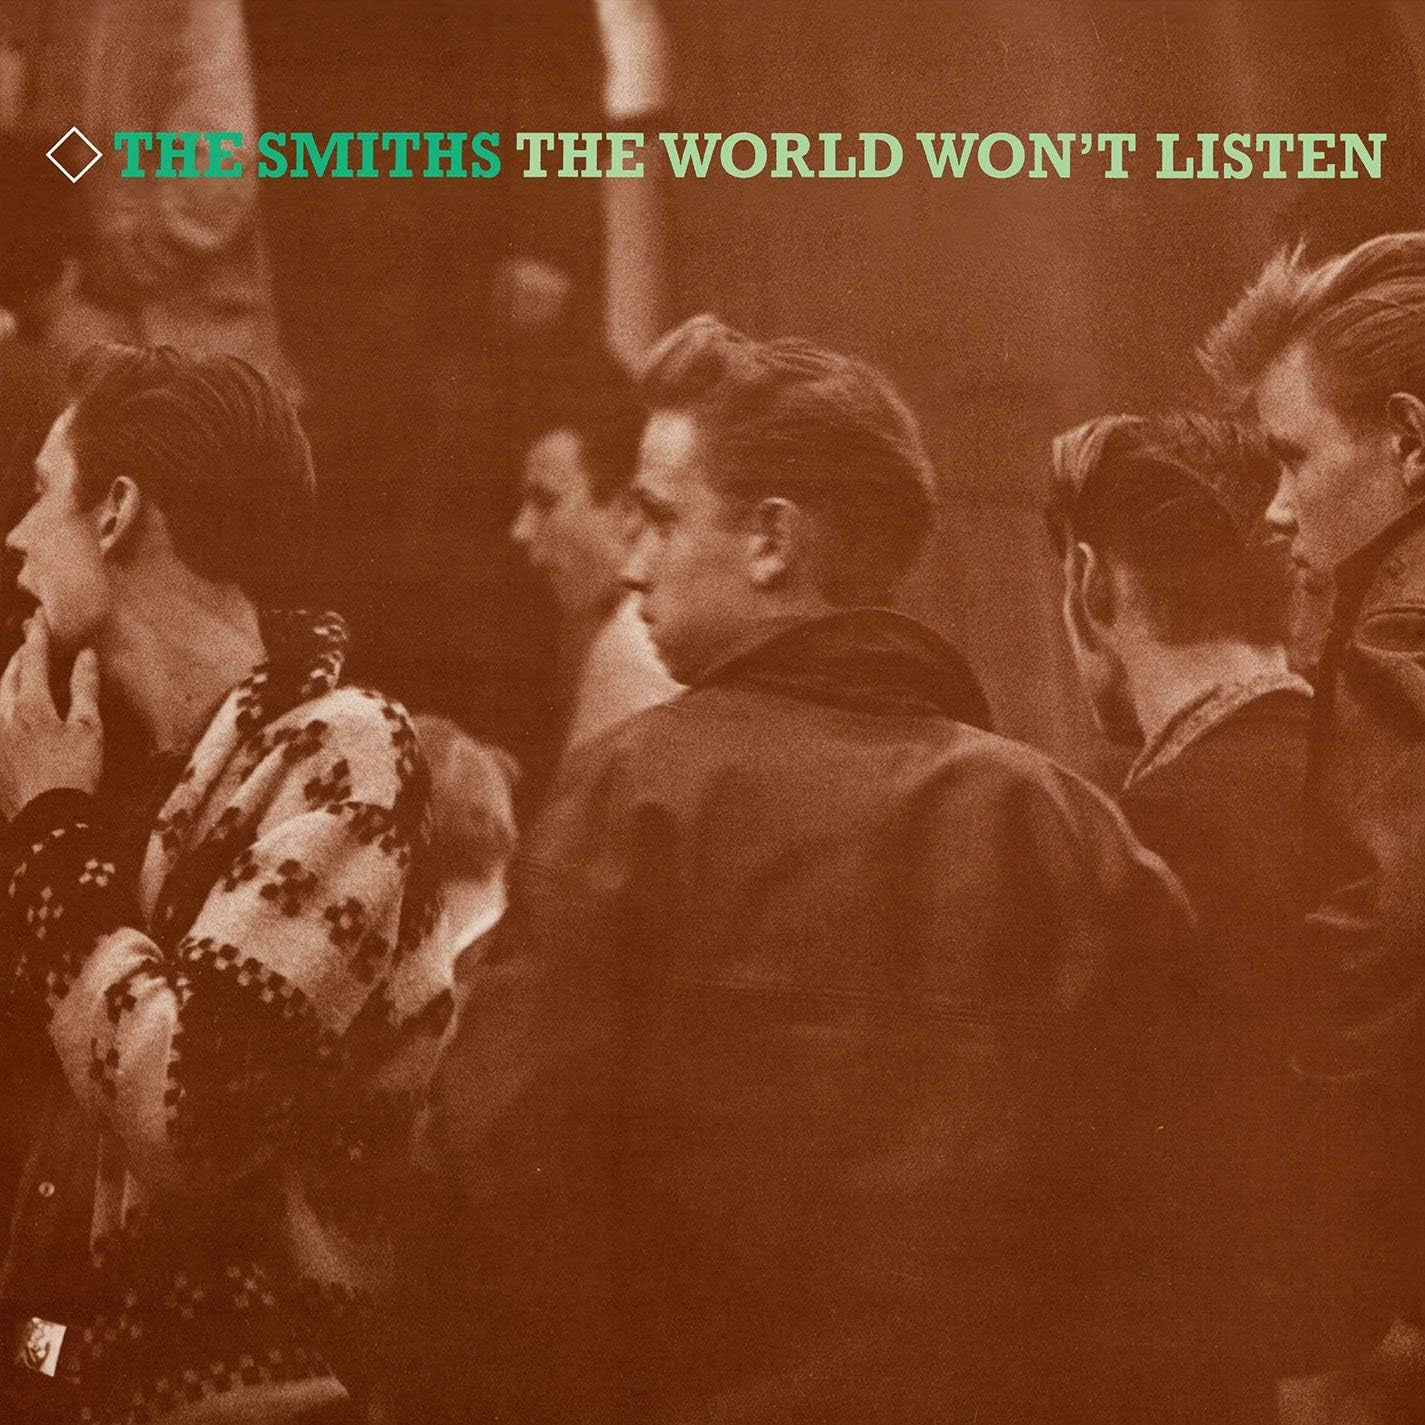 The SMITHS 'THE WORLD WON'T LISTEN' – BIG LOVE RECORDS